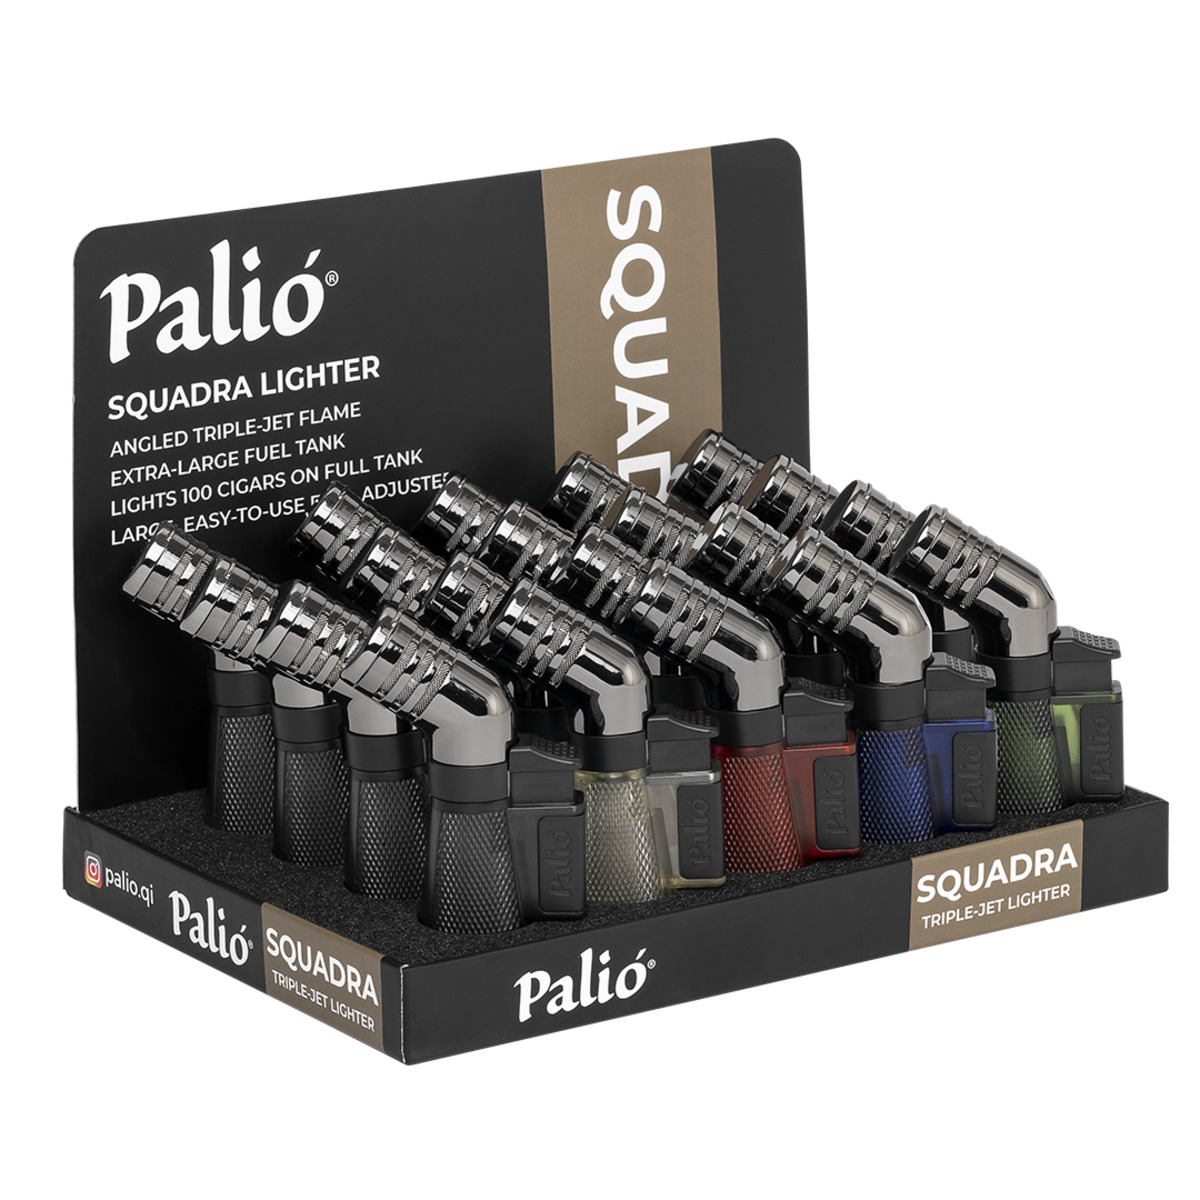 Palio Squadra Lighters Assorted Colors (Black, Clear, Red, Blue & Green), 20